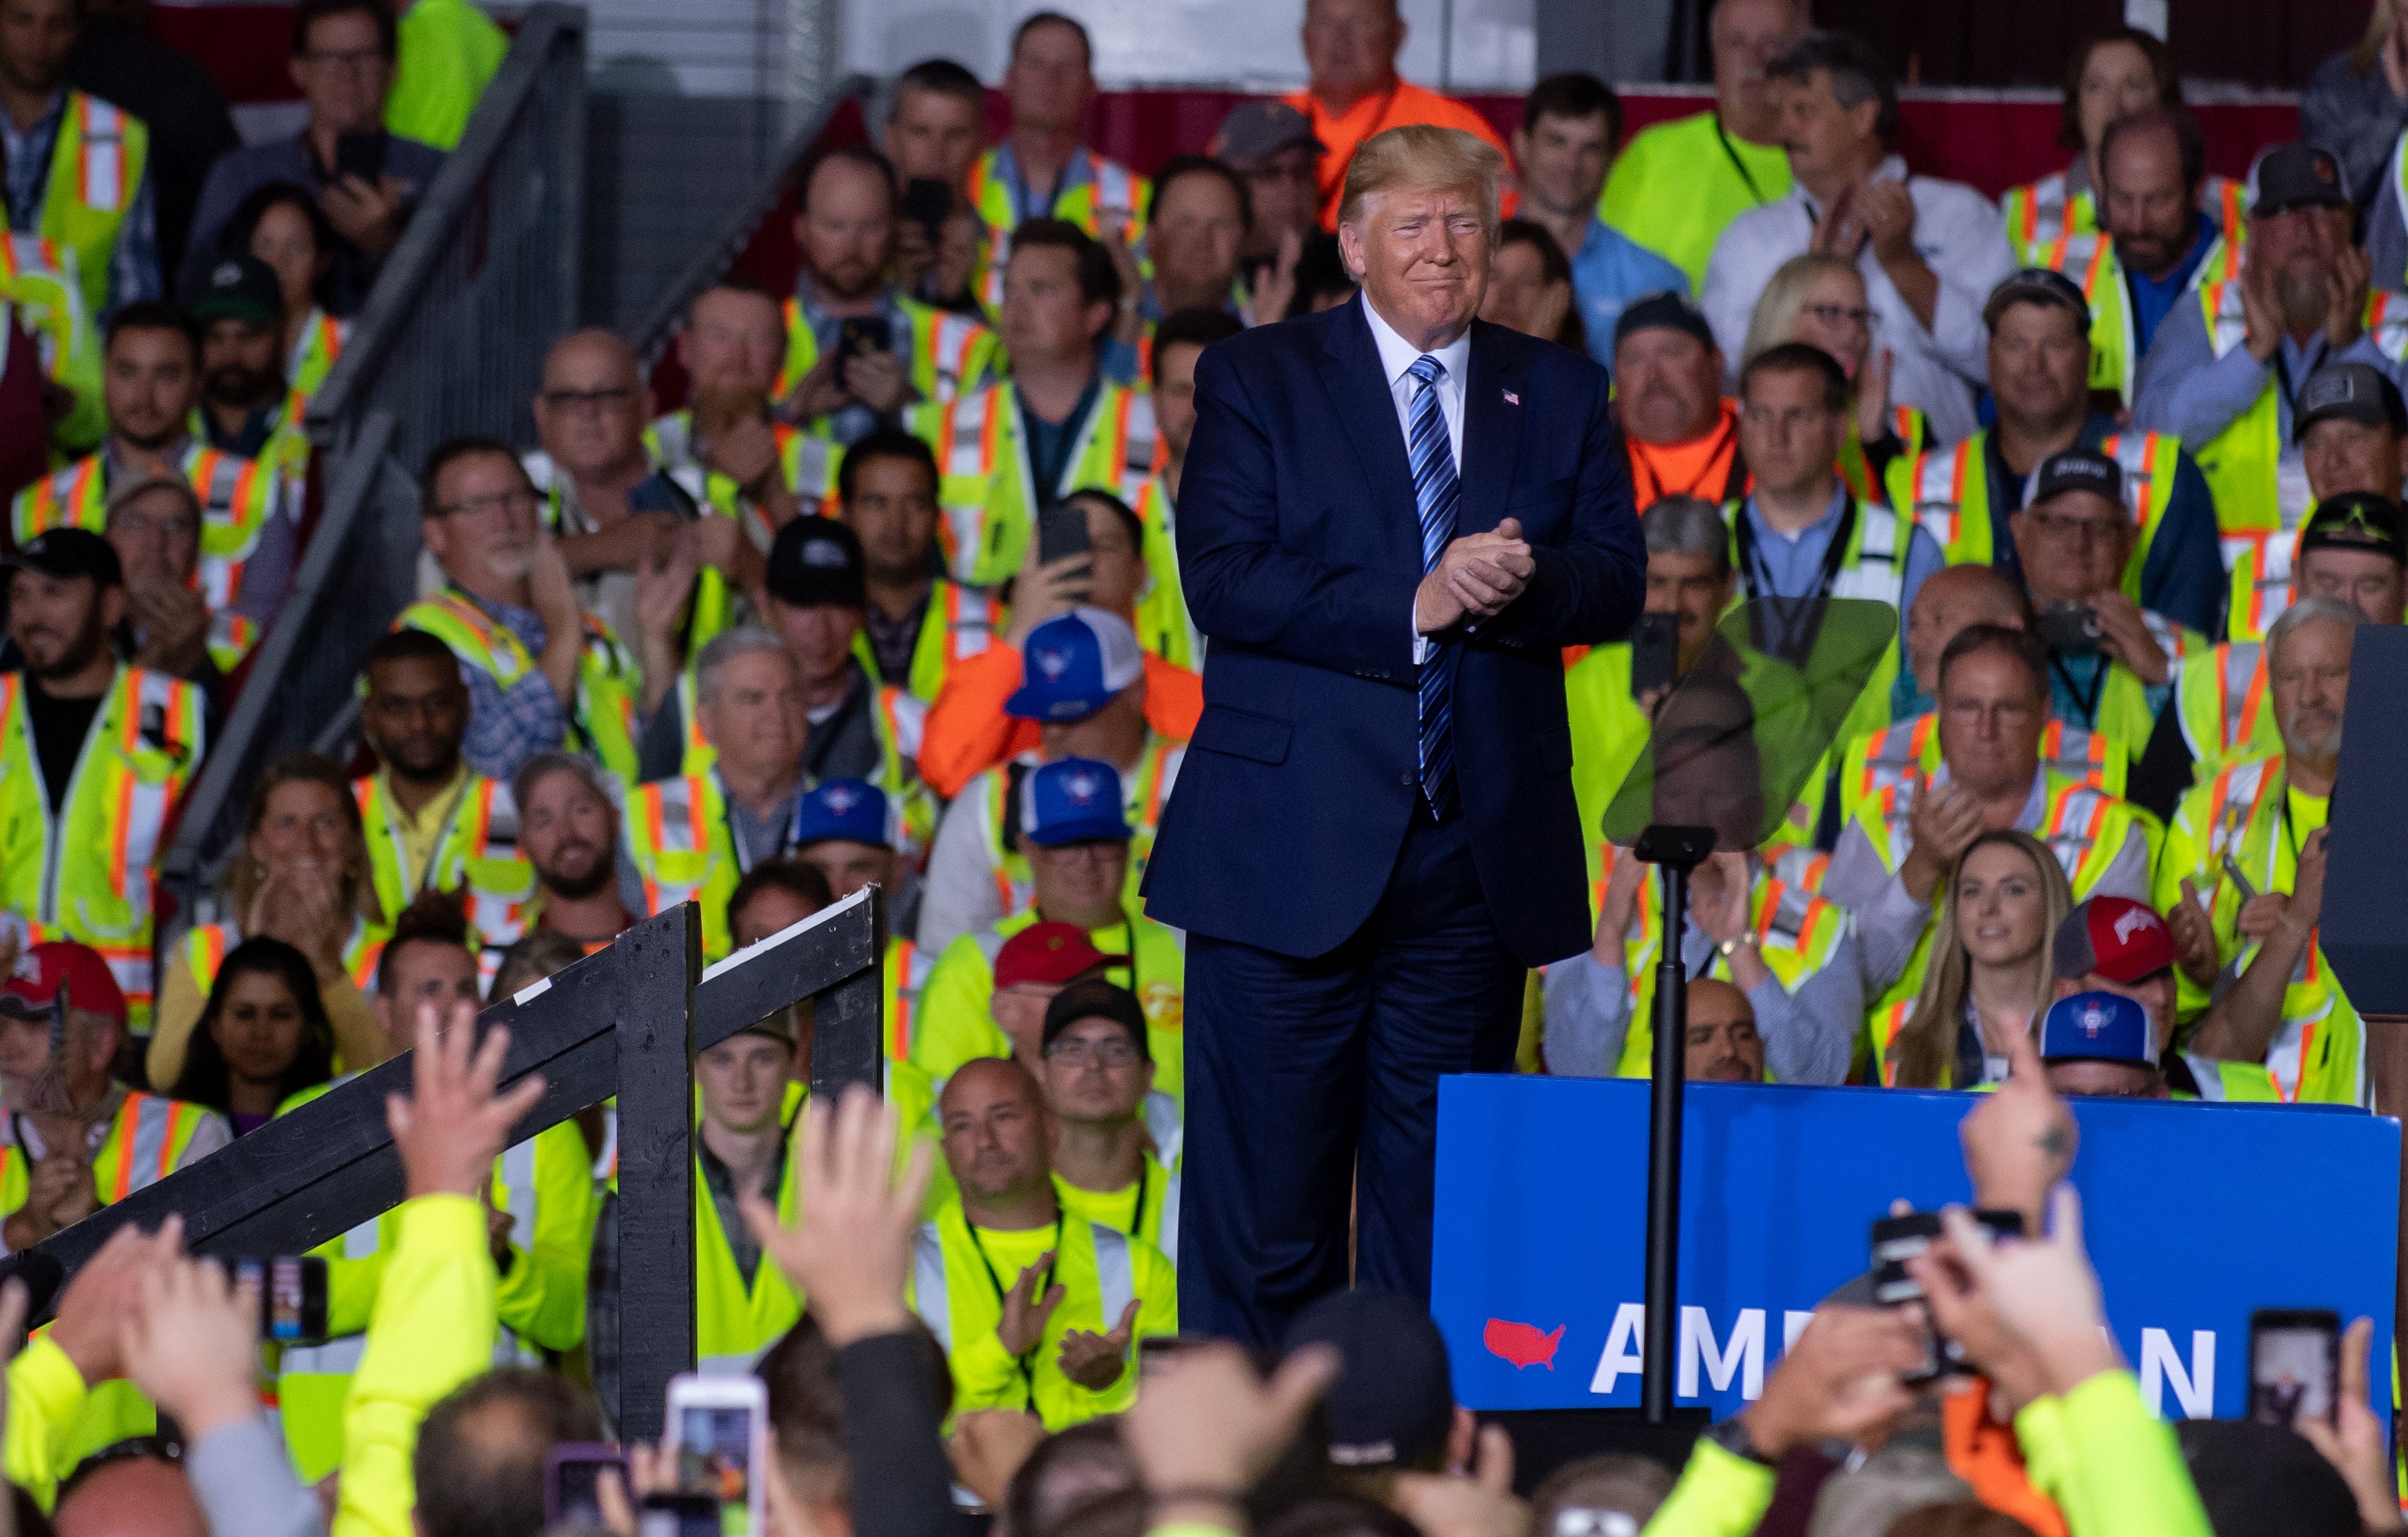 Shell Workers In Pennsylvania Say They Were Told Either Attend A Trump Event Or Not Get Paid